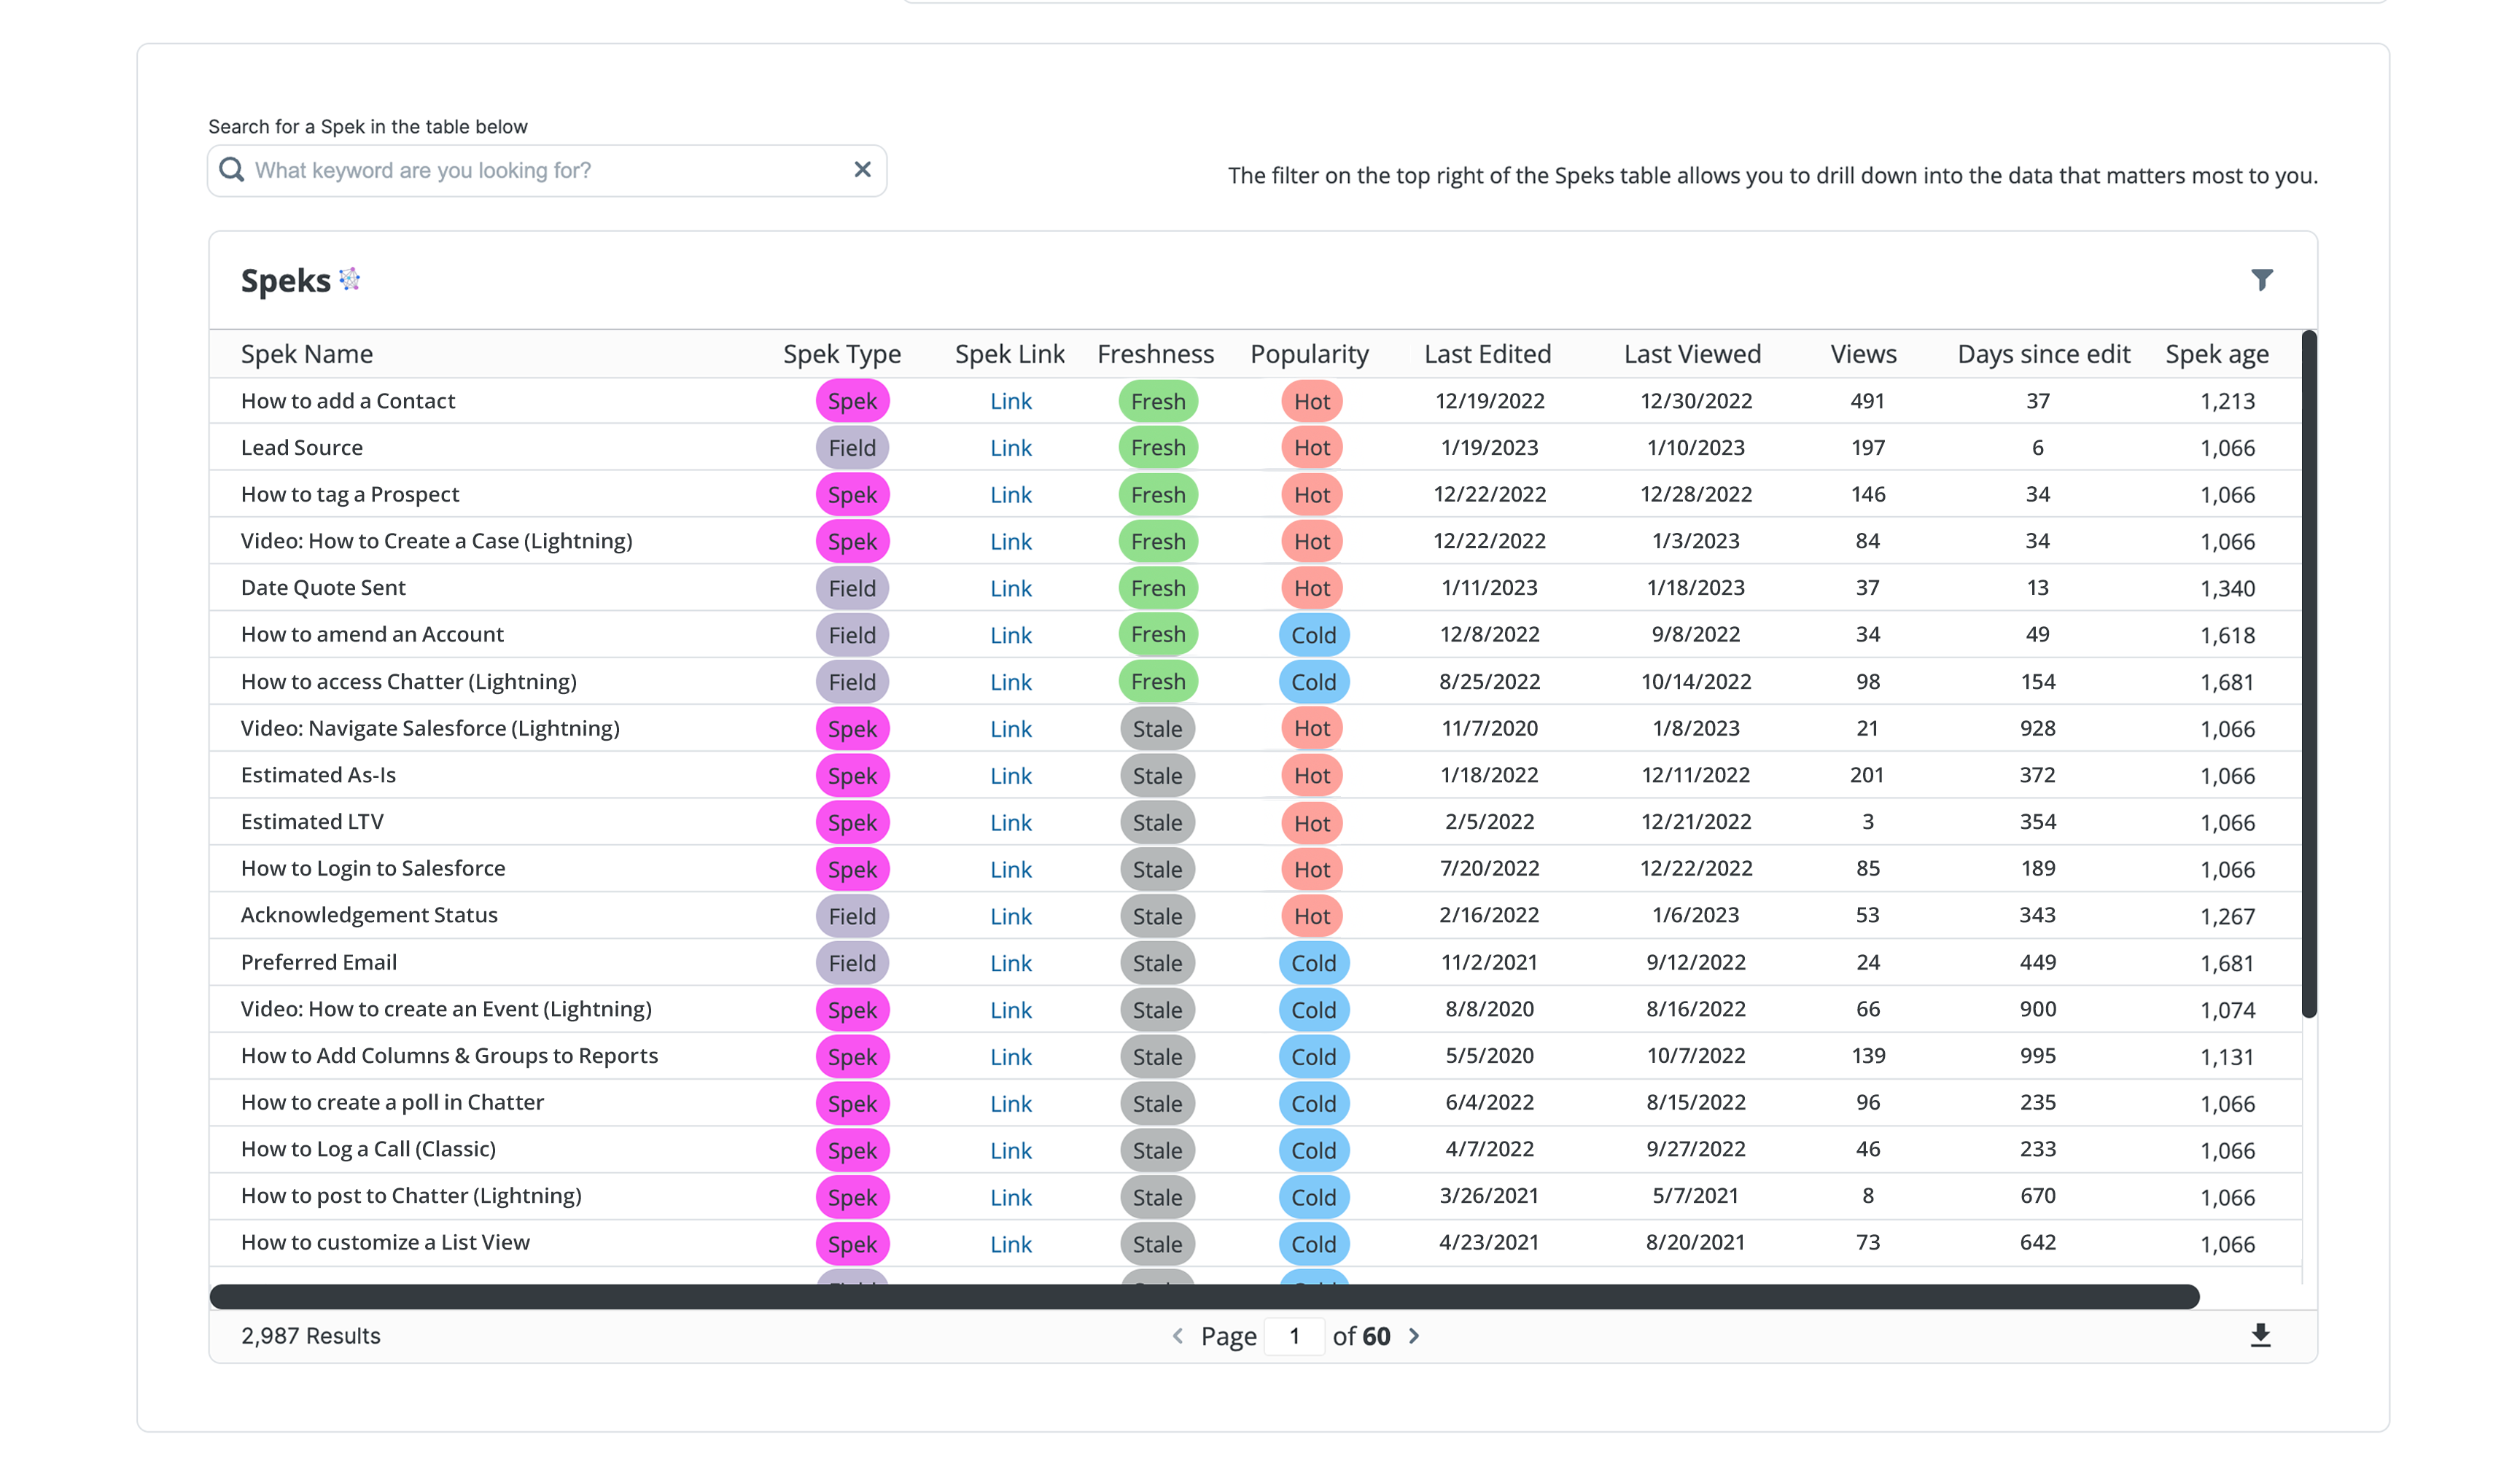 web-app-analytics-spek-management-dashboard-table-anonymized.png